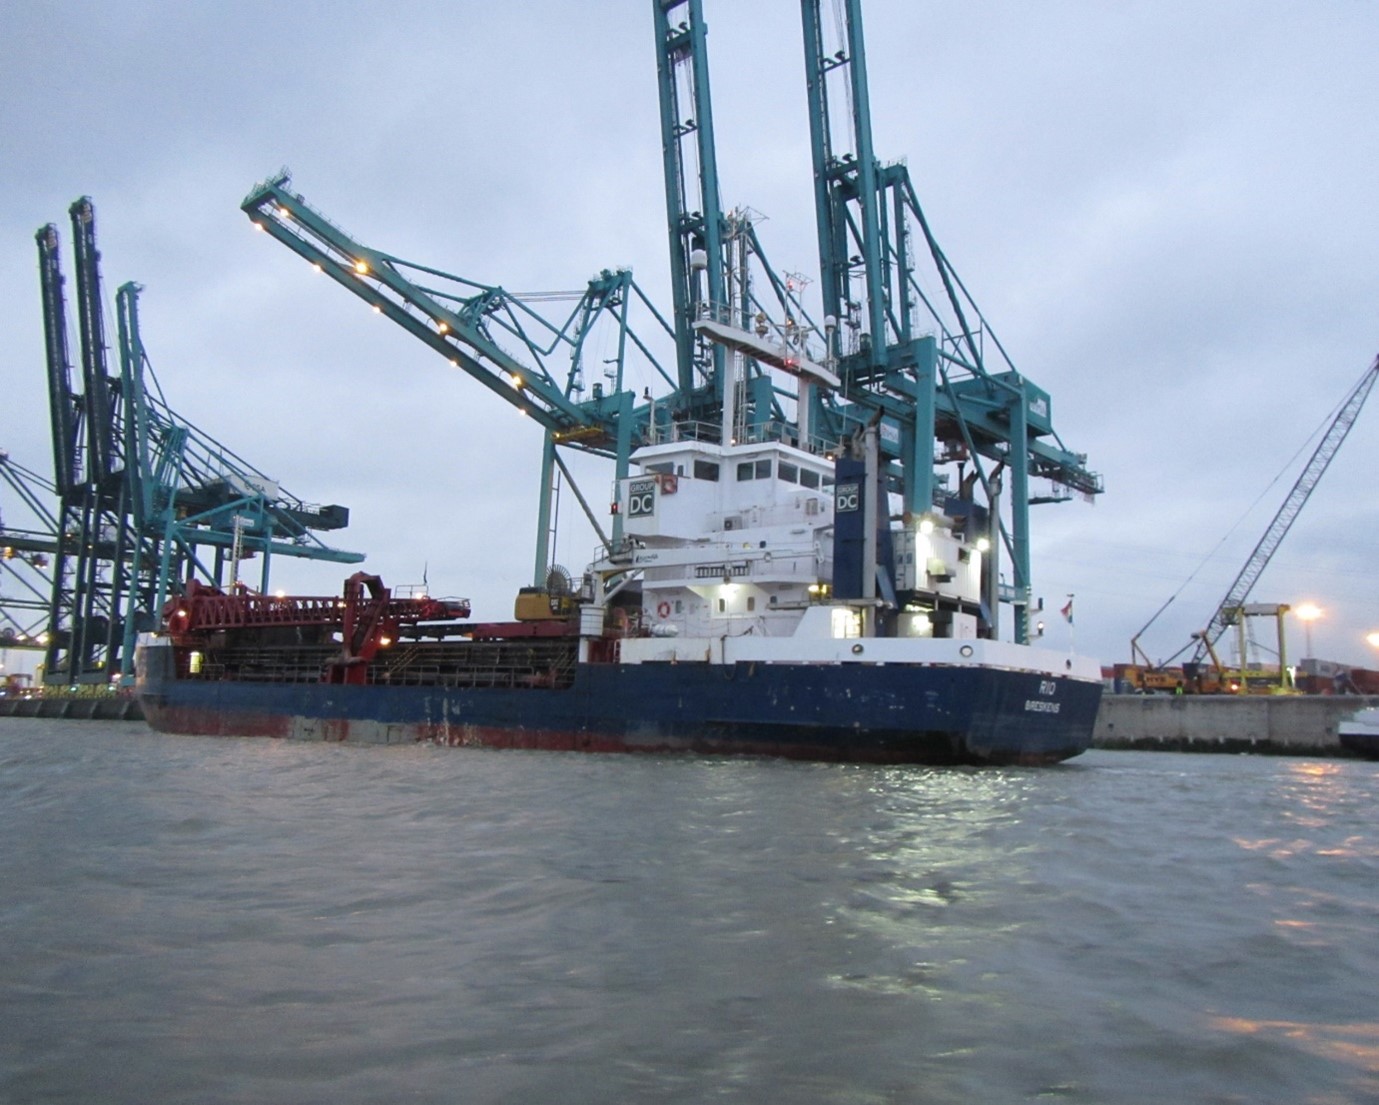 Maintenance dredging works in the port of Brussels